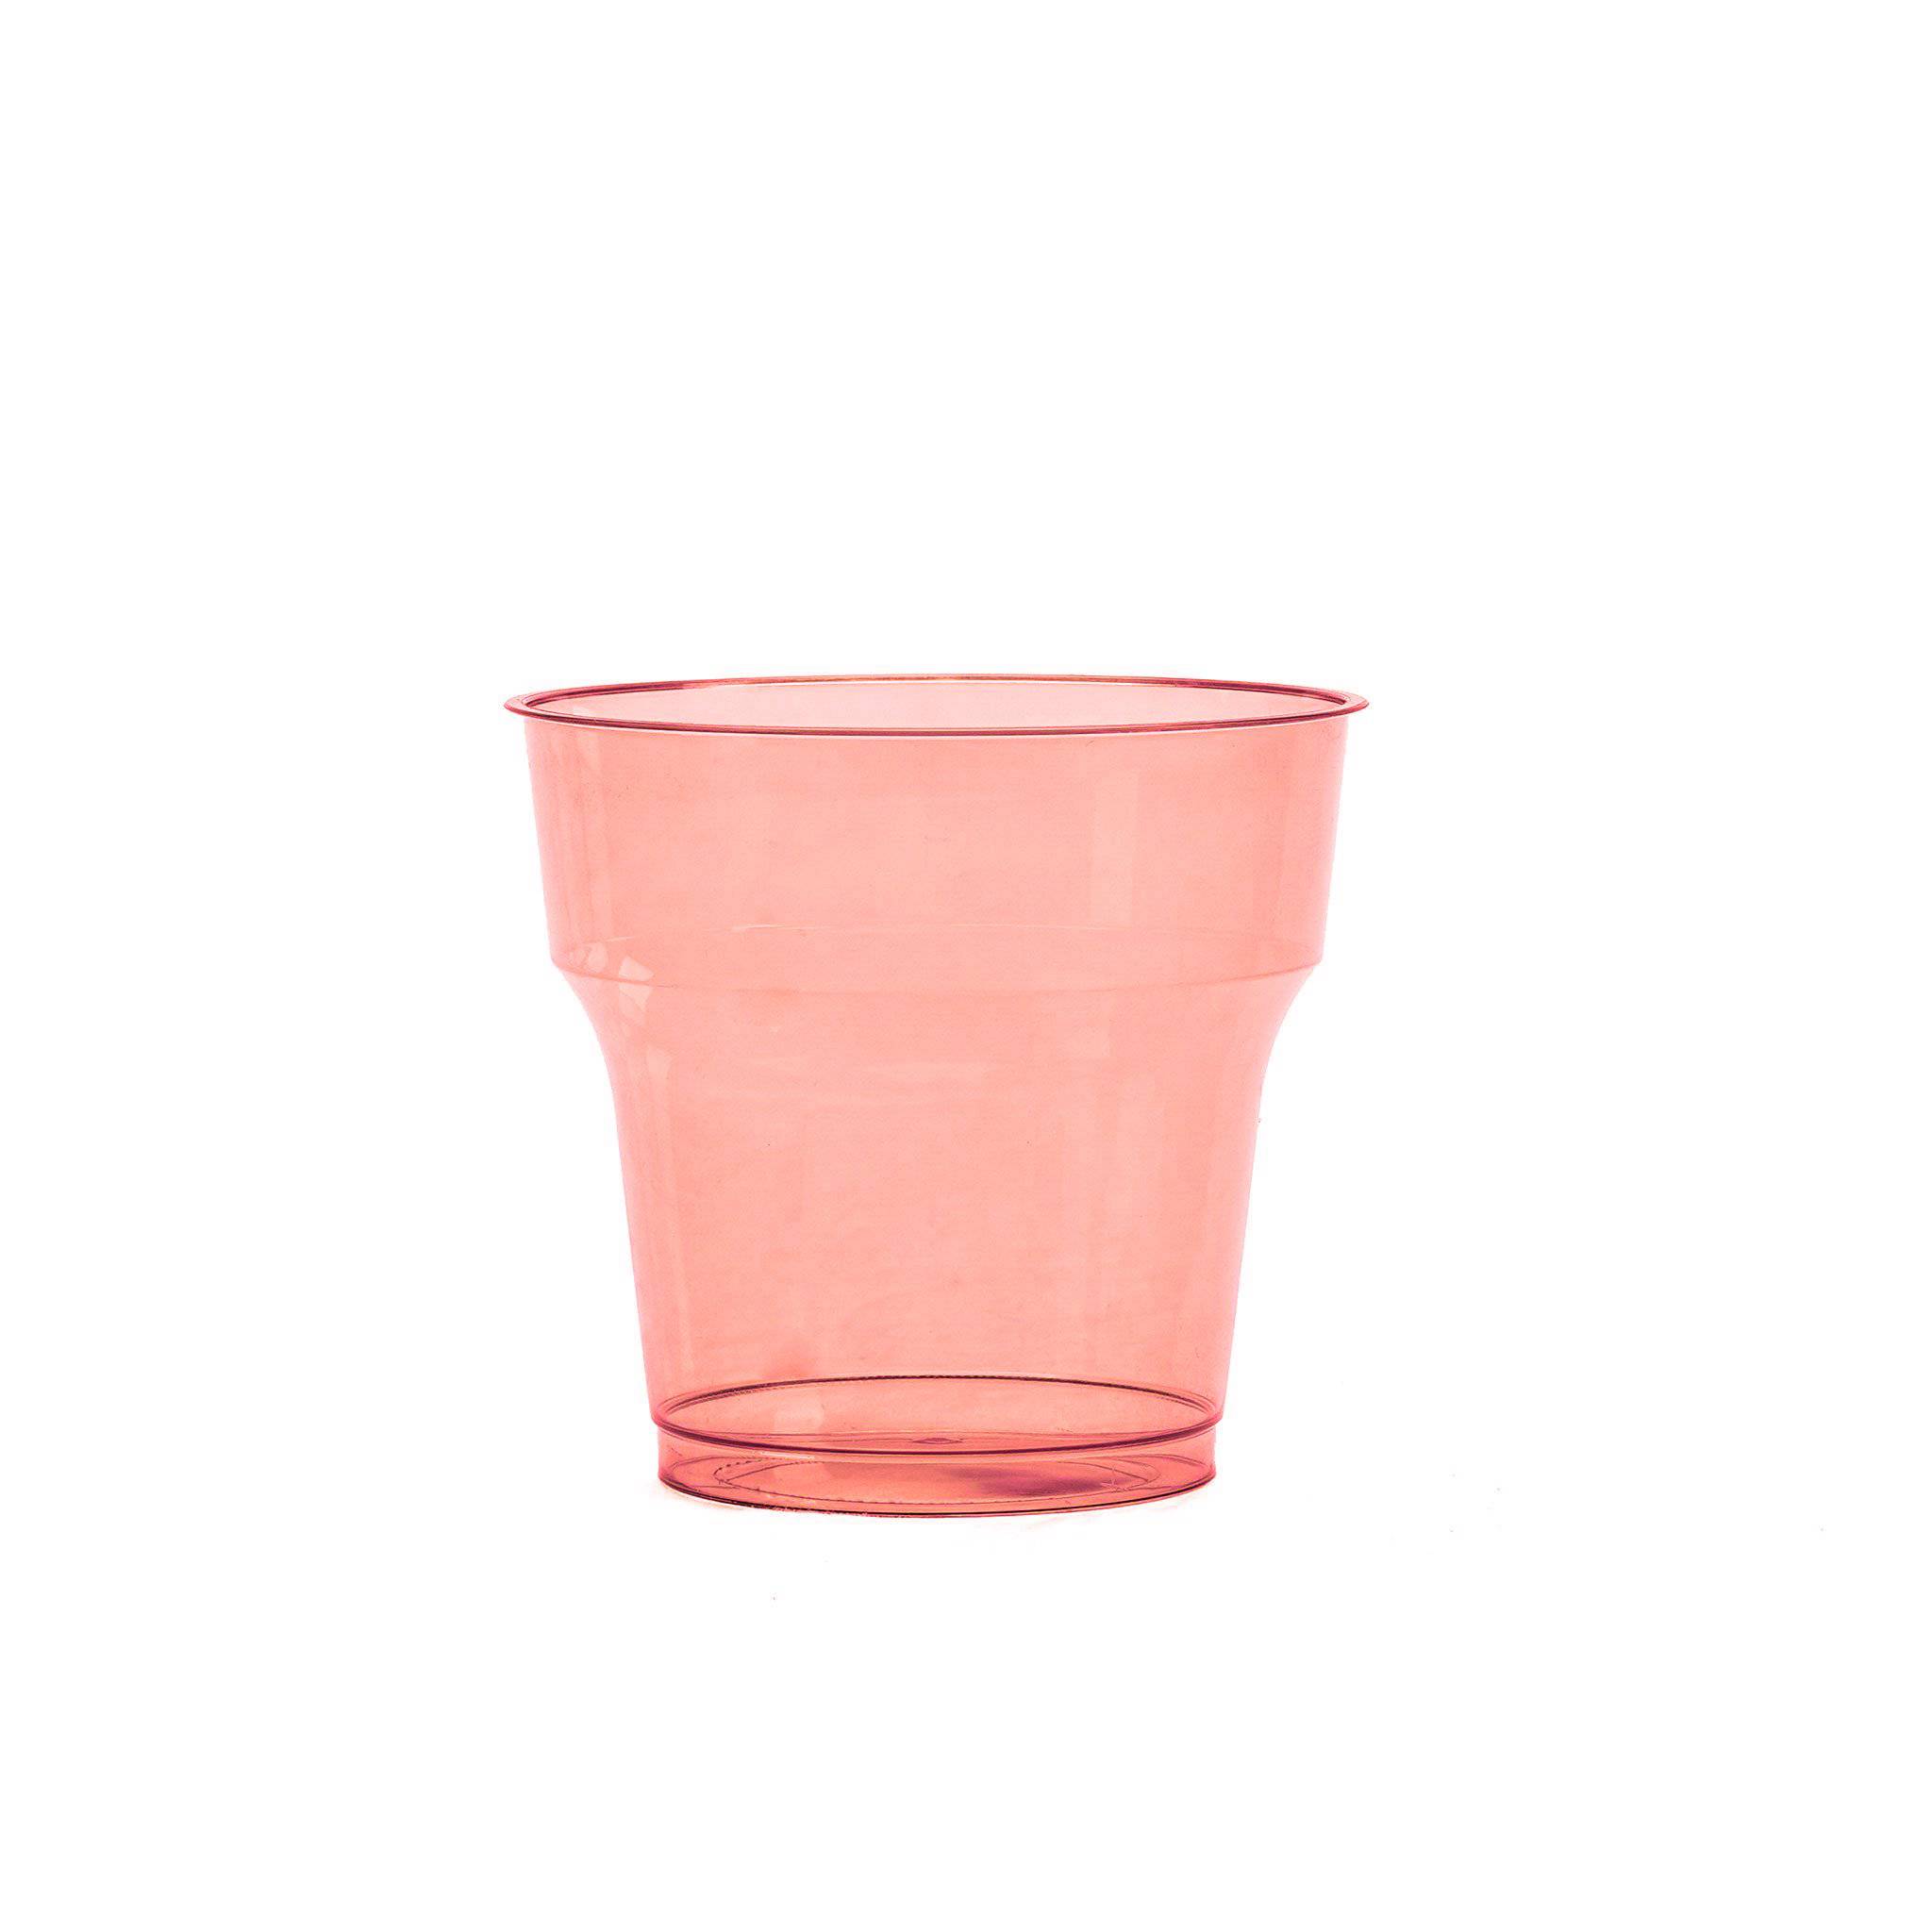 Crystal Airline Drinking Cup 6 Oz (180 ml) 1000 Pieces - Hotpack Global